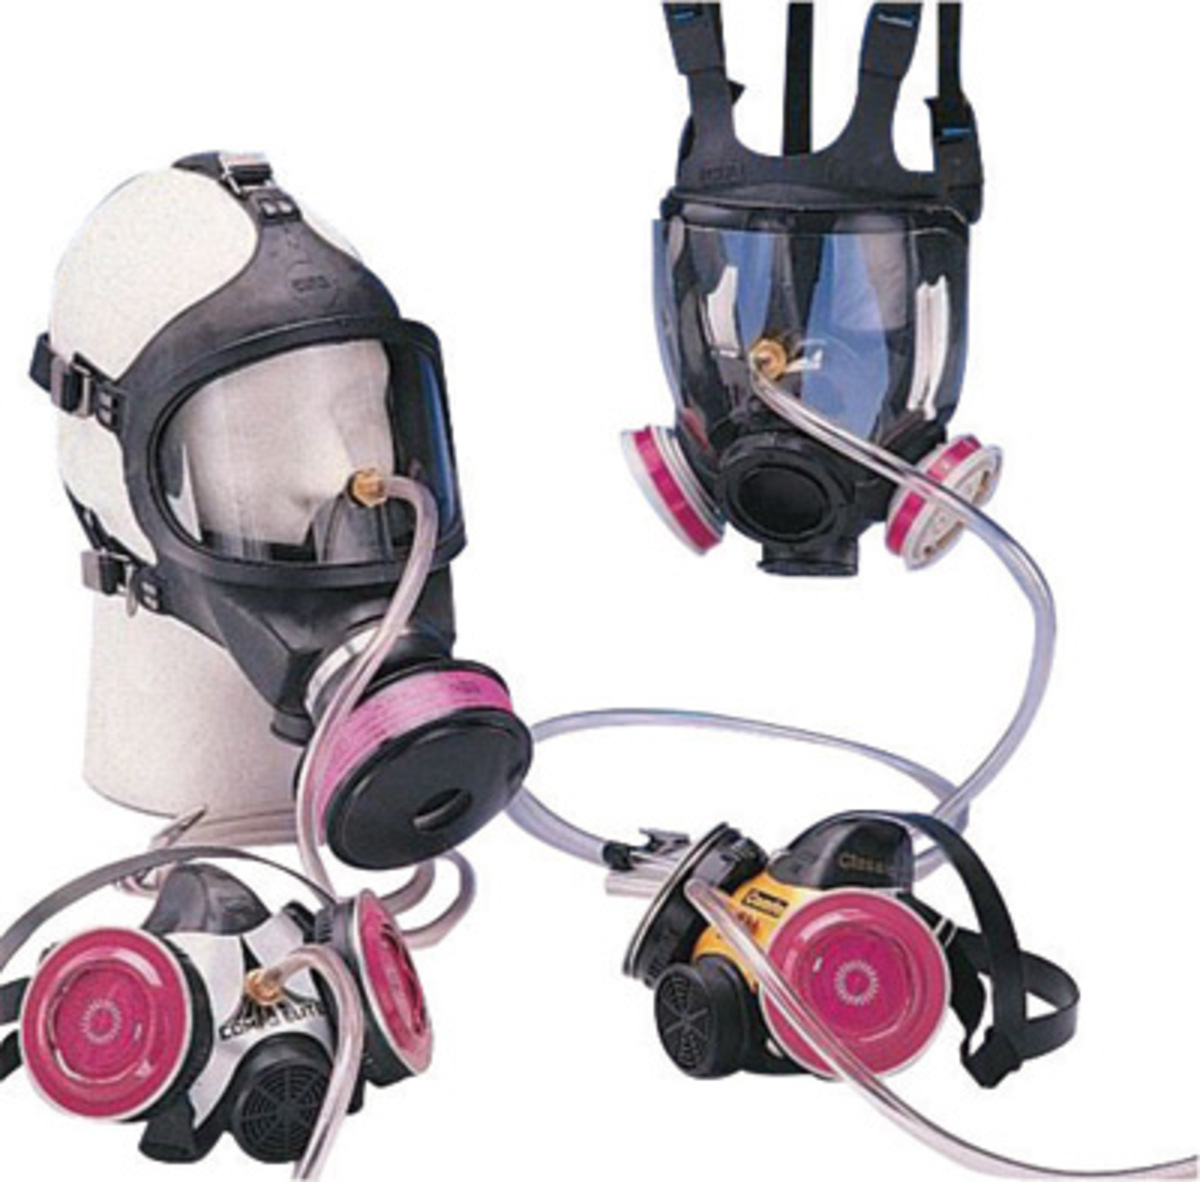 MSA Medium Ultra-Elite® Series Full Face Air Purifying Respirator (Availability restrictions apply.)